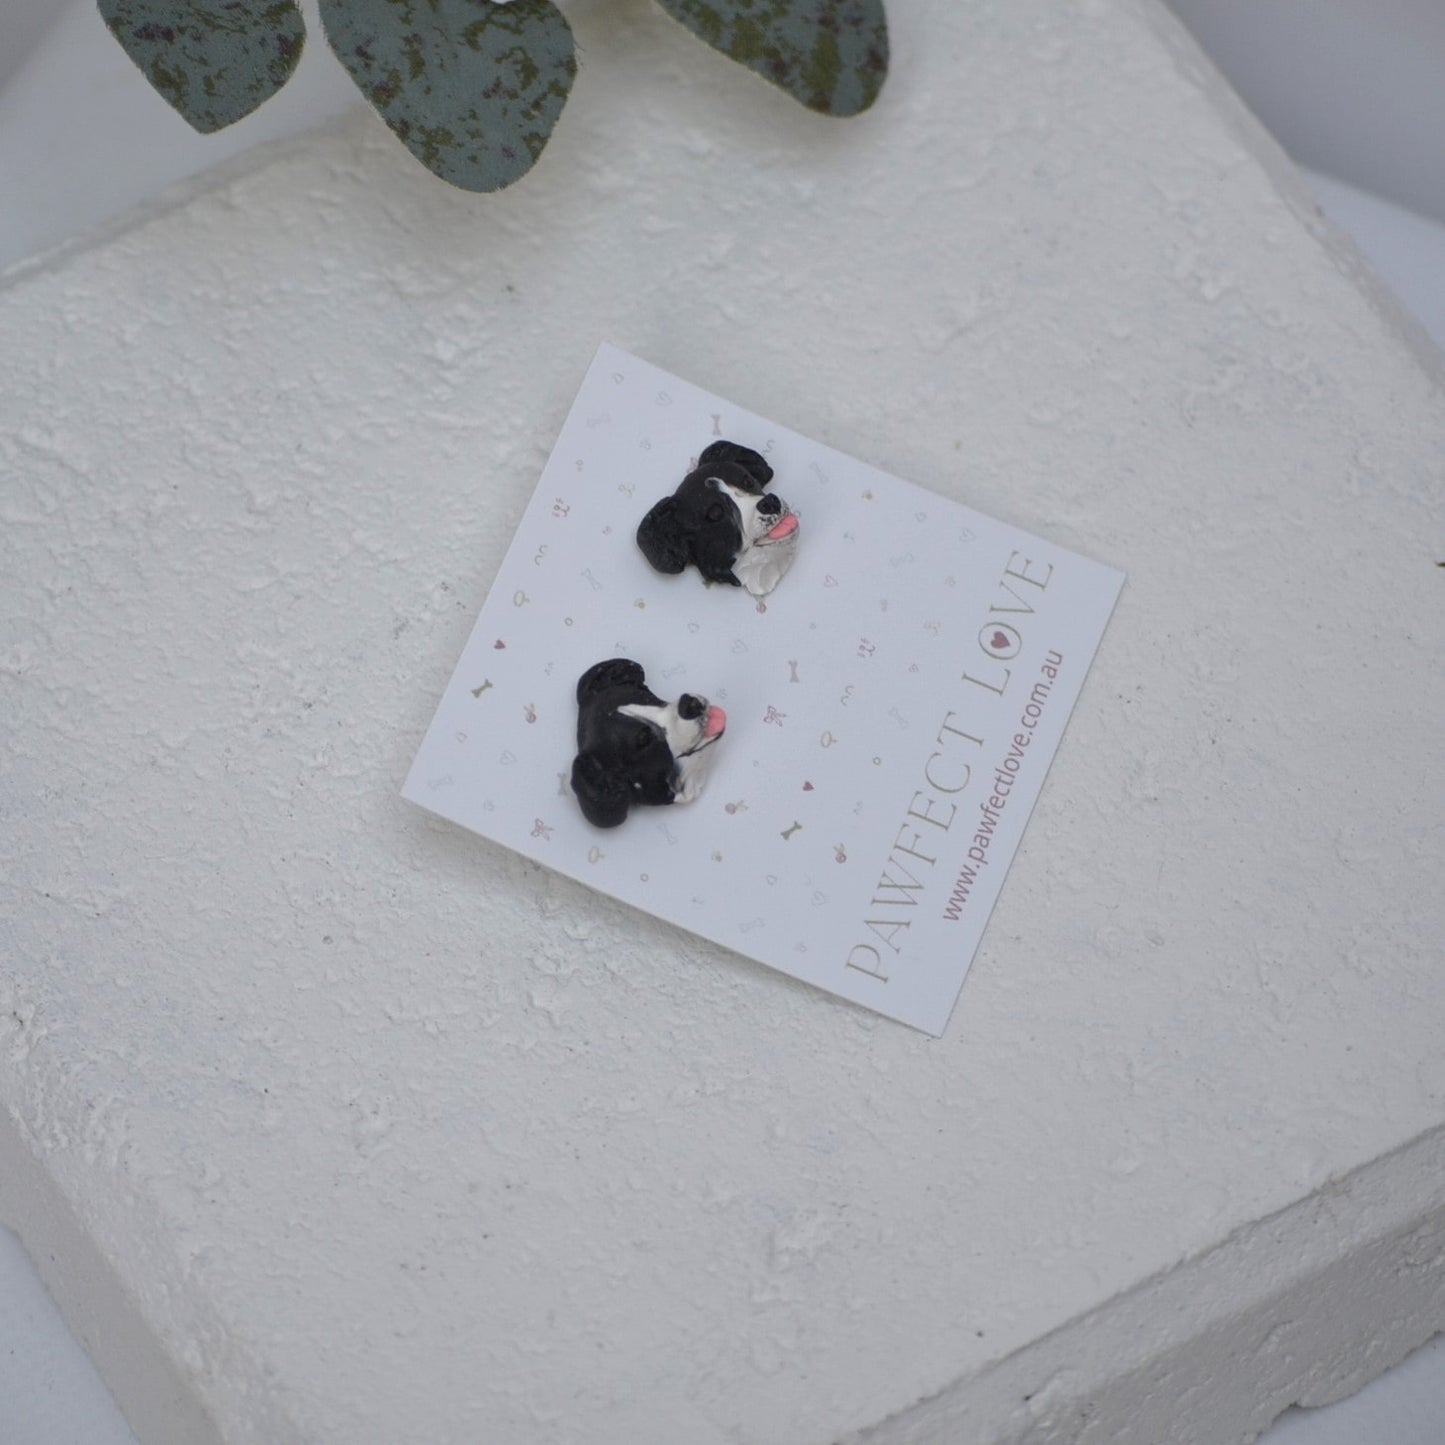 Handmade border collie stud earrings by Pawfect Love, positioned in front of white paver